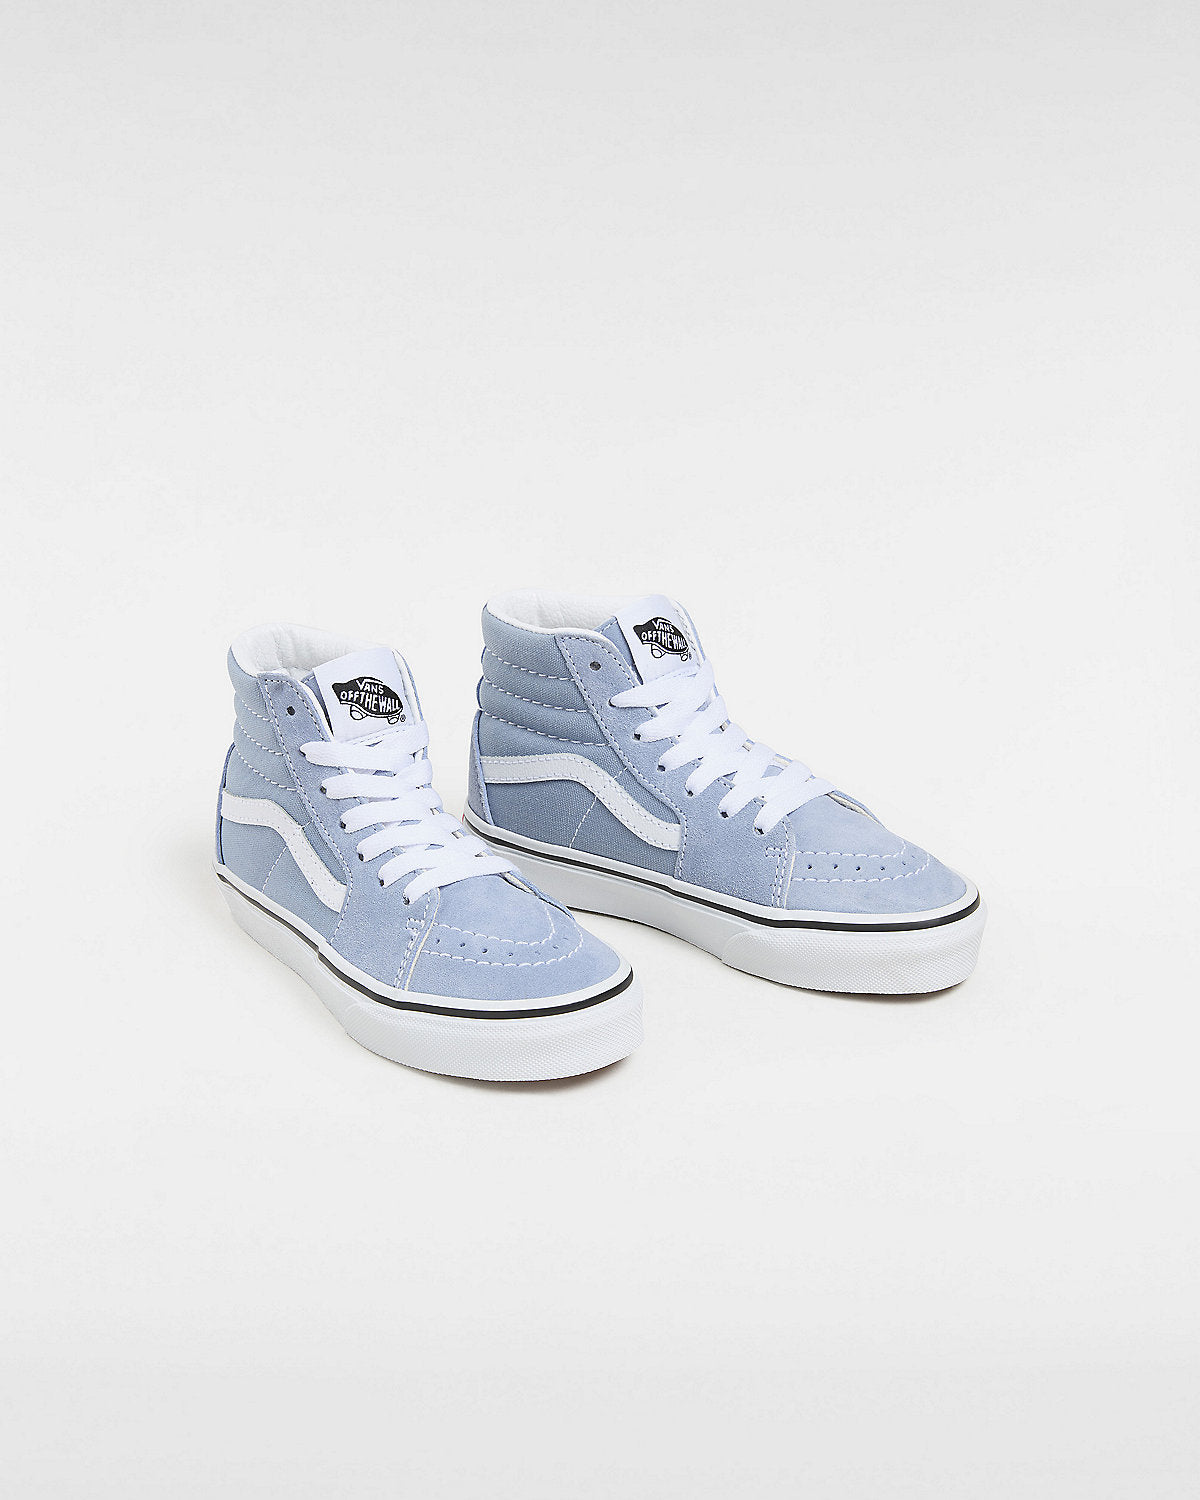 VANS Kids Sk8-Hi Color Theory Trainers - Dusty Blue